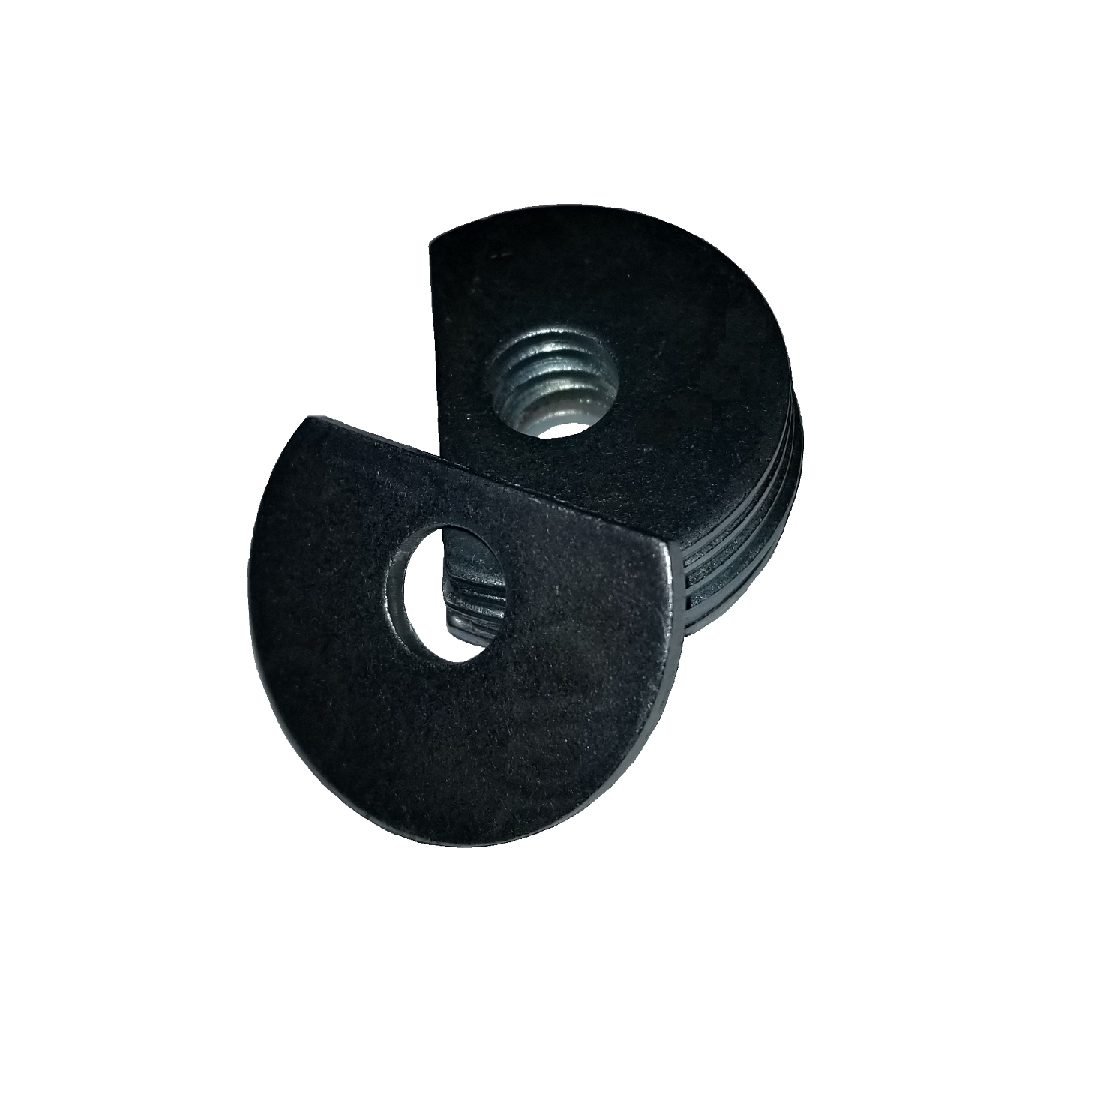 Clipped OD Washer - 0.693 ID, 1.281 OD, 0.157 Thick, Spring Steel - Hard, Phosphate & Oil